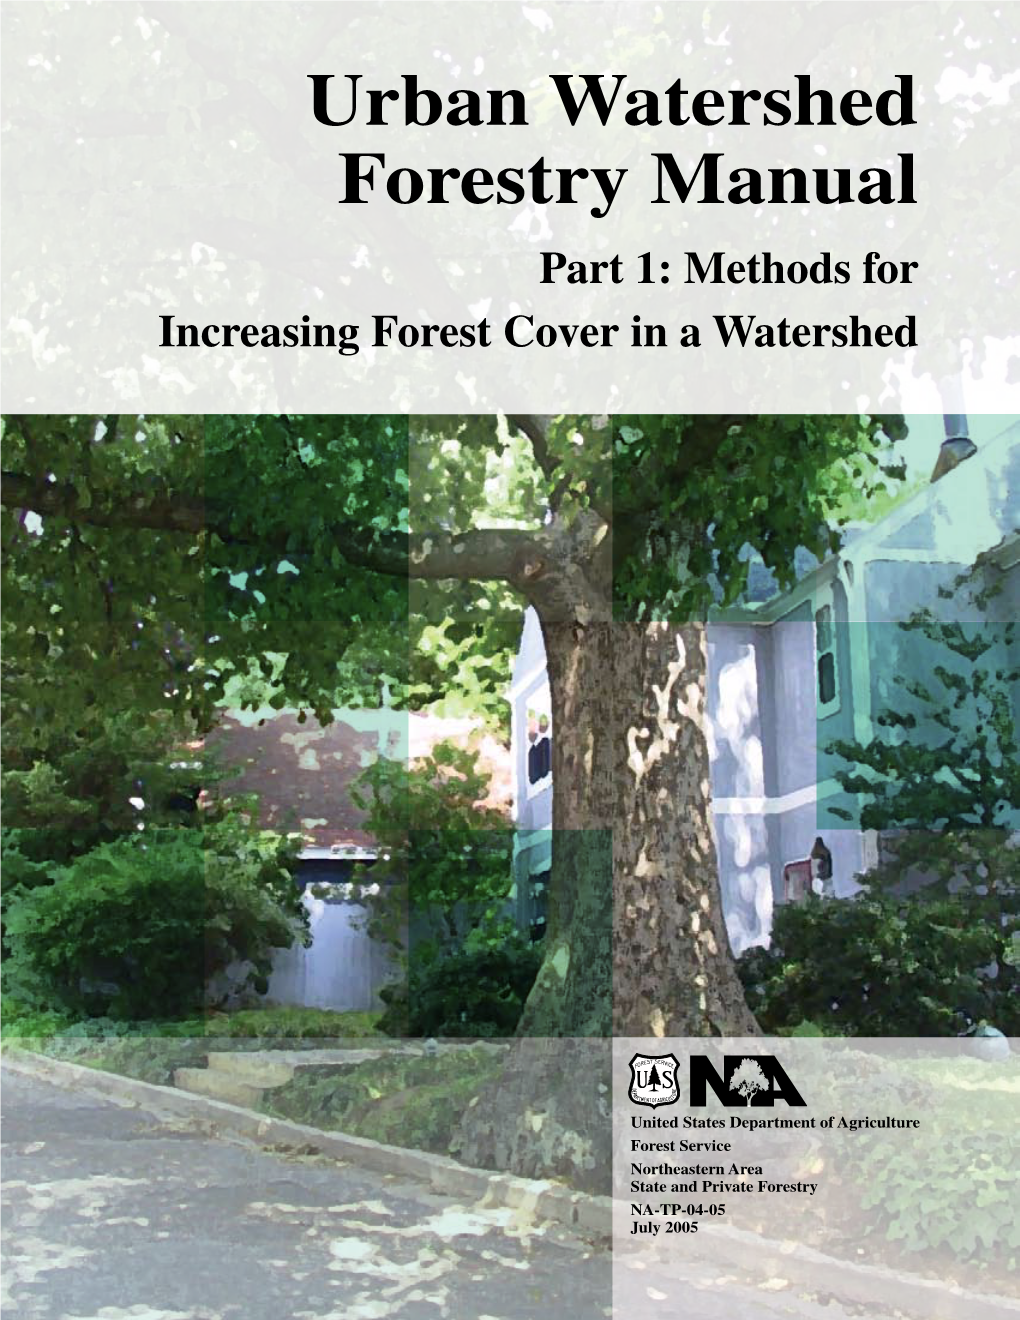 Urban Watershed Forestry Manual Part 1: Methods for Increasing Forest Cover in a Watershed